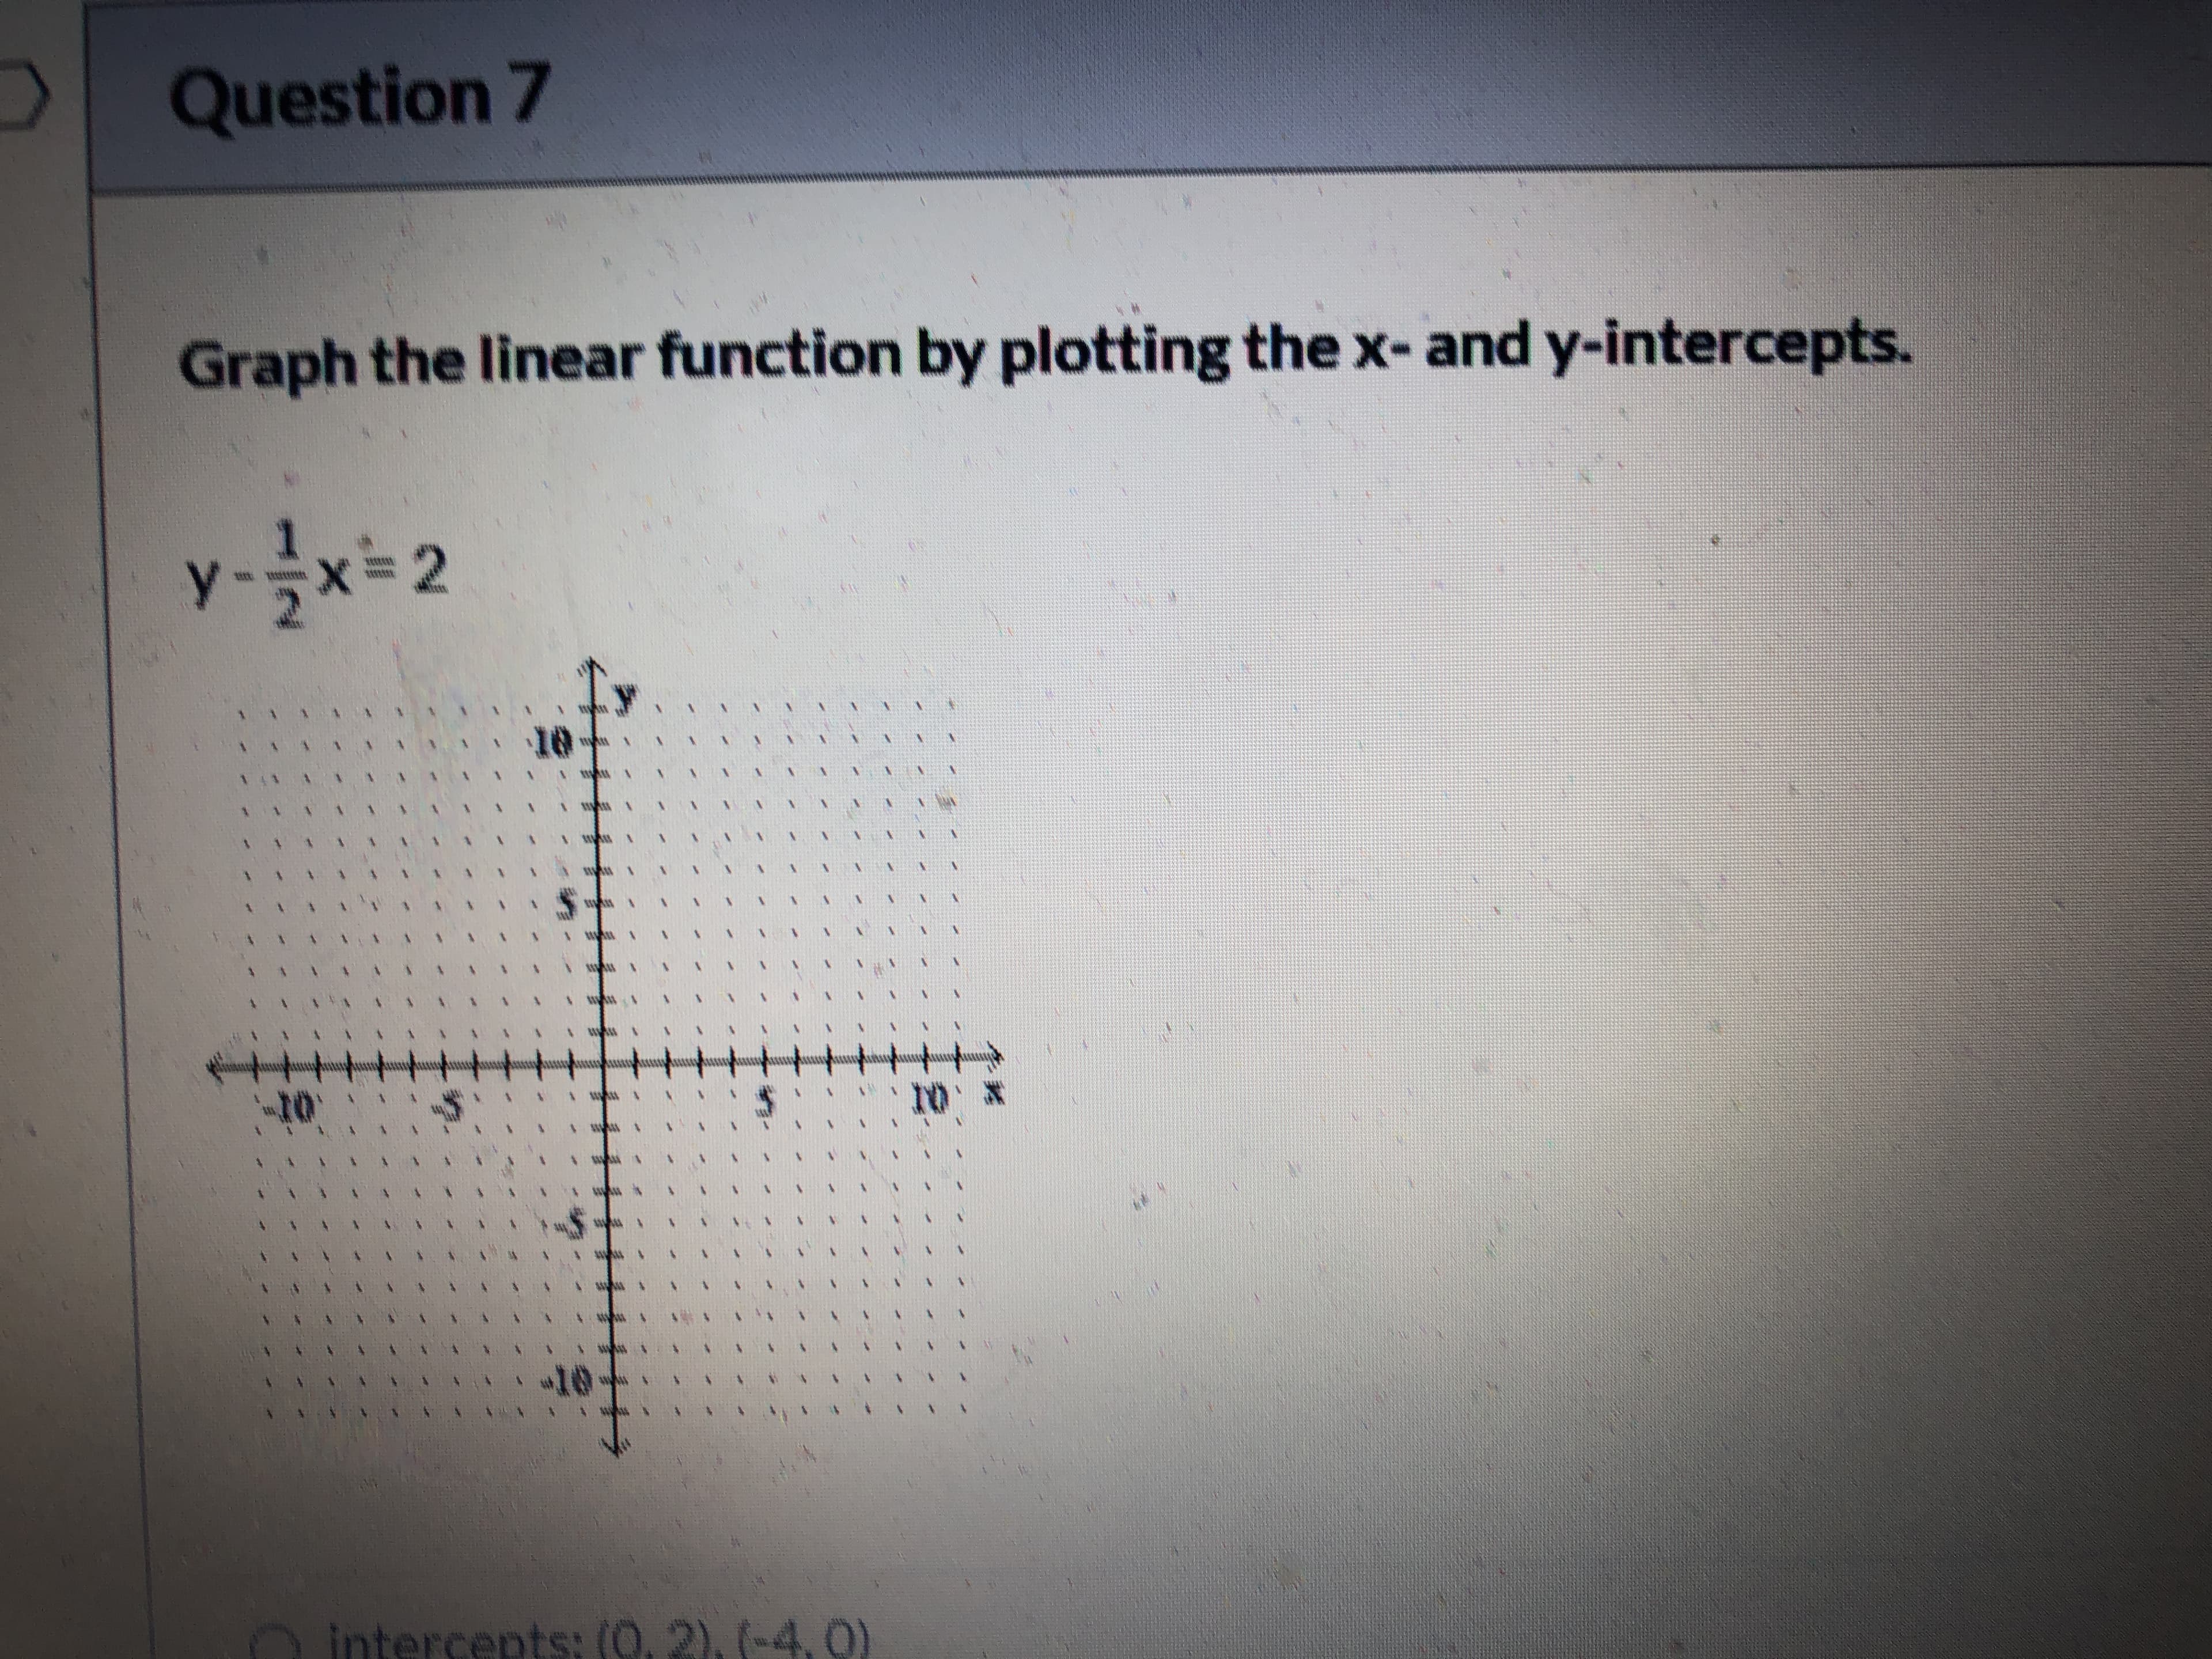 D Question 7
Graph the linear function by plotting the x- and y-intercepts.
y-글x= 2
O intercepts: (0,2).(-4.0)
